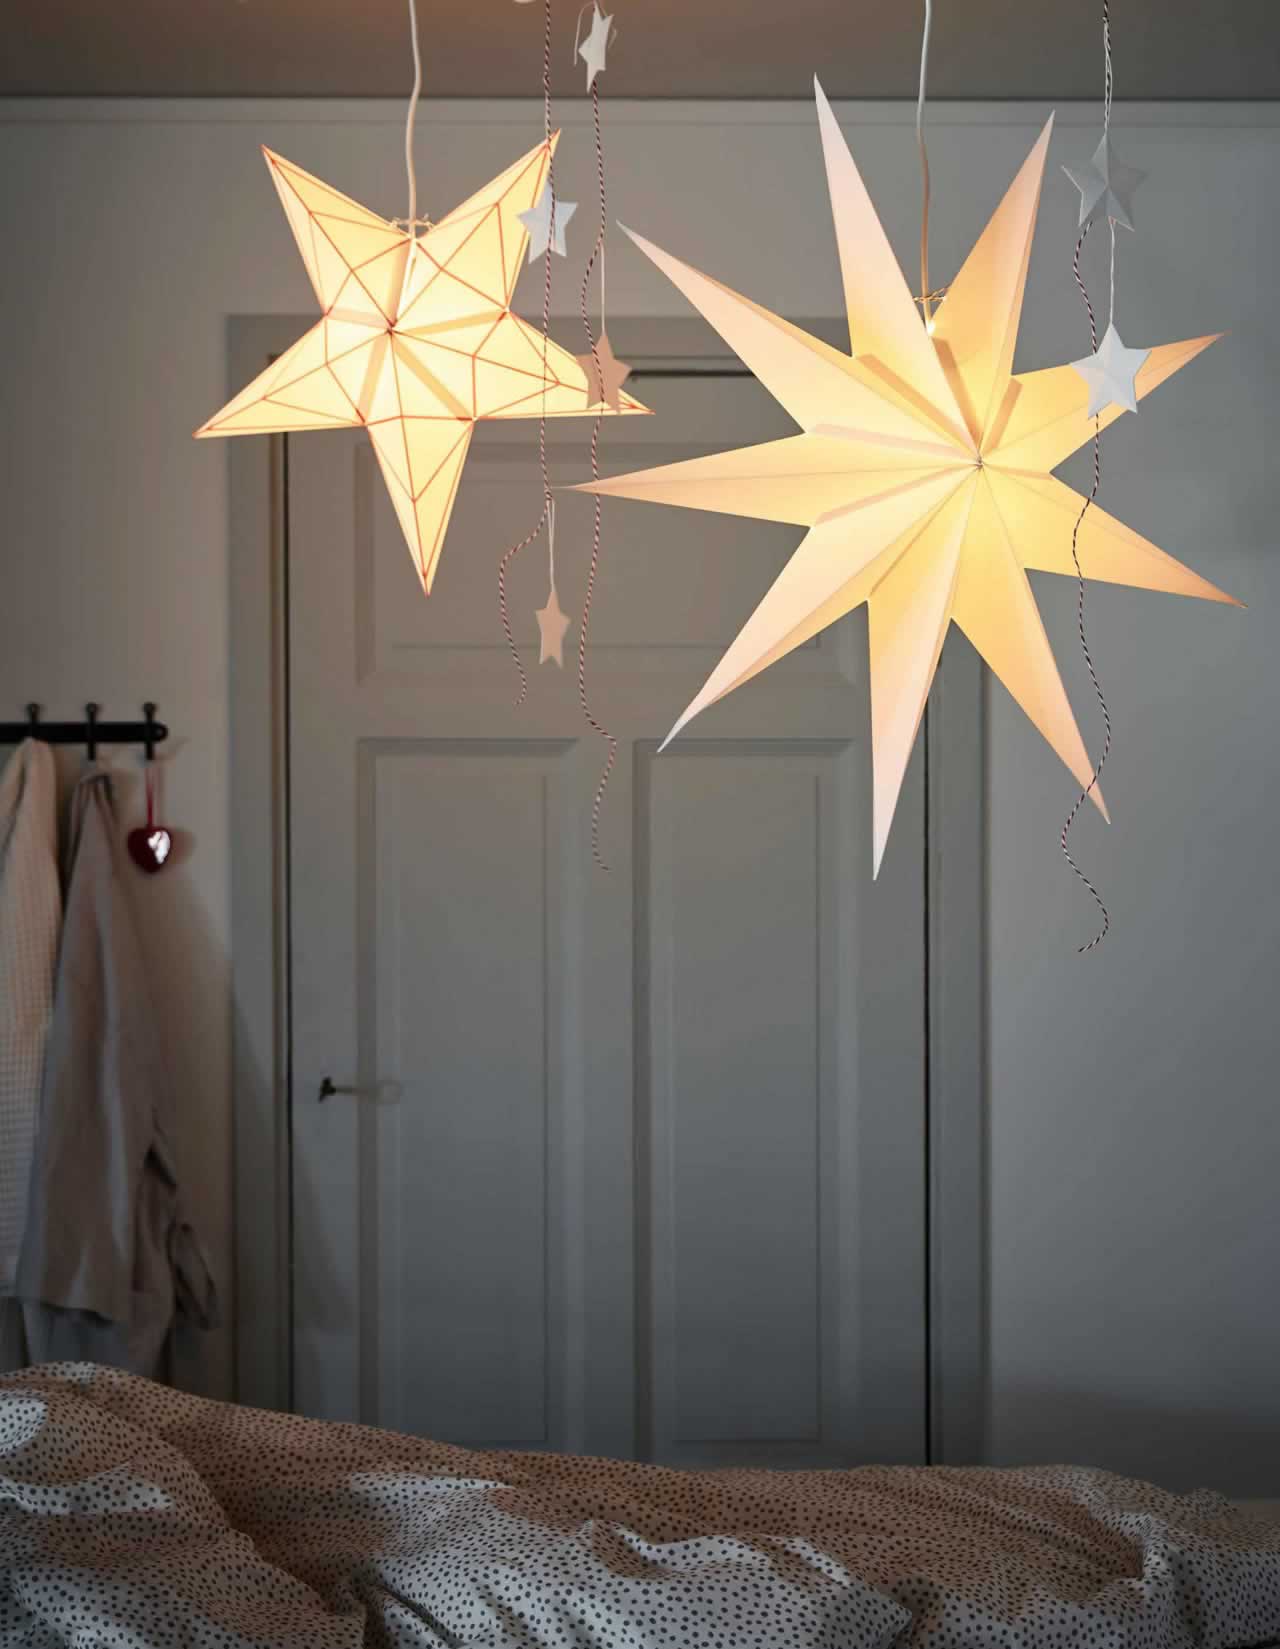 IKEA Ideas - 5 easy deco tips for the holiday